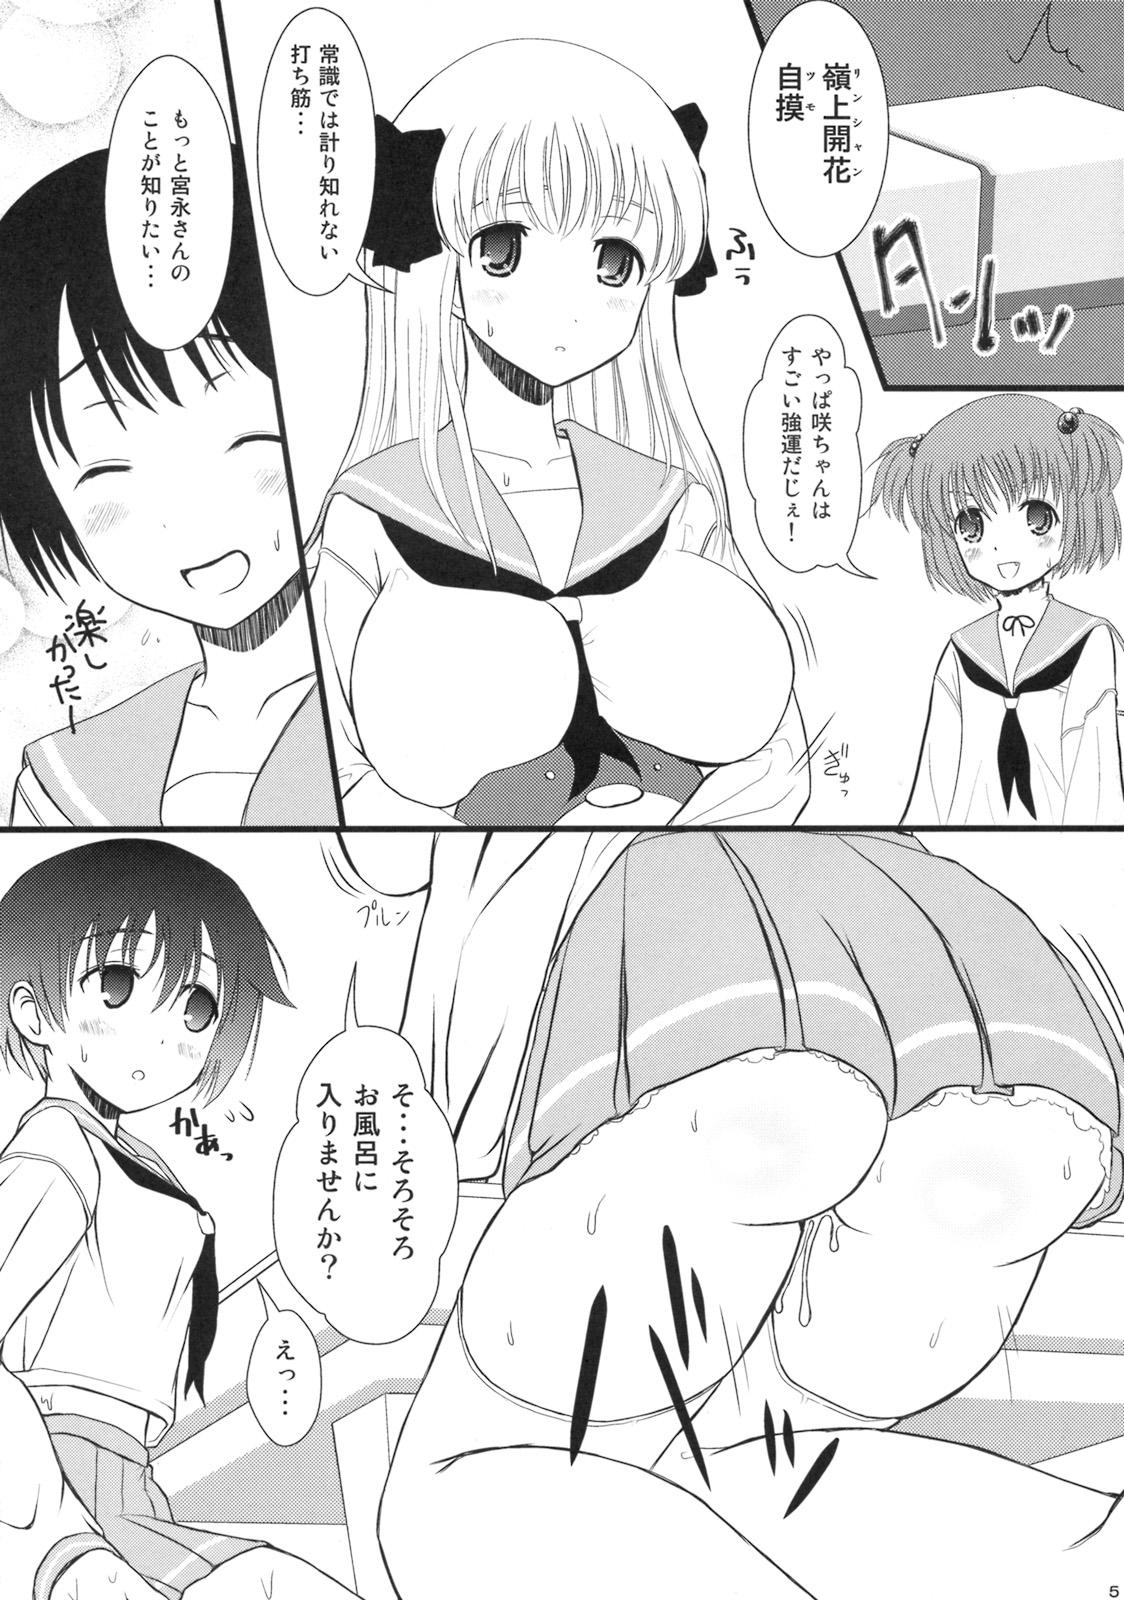 Russia blooming - Saki Fisting - Page 3